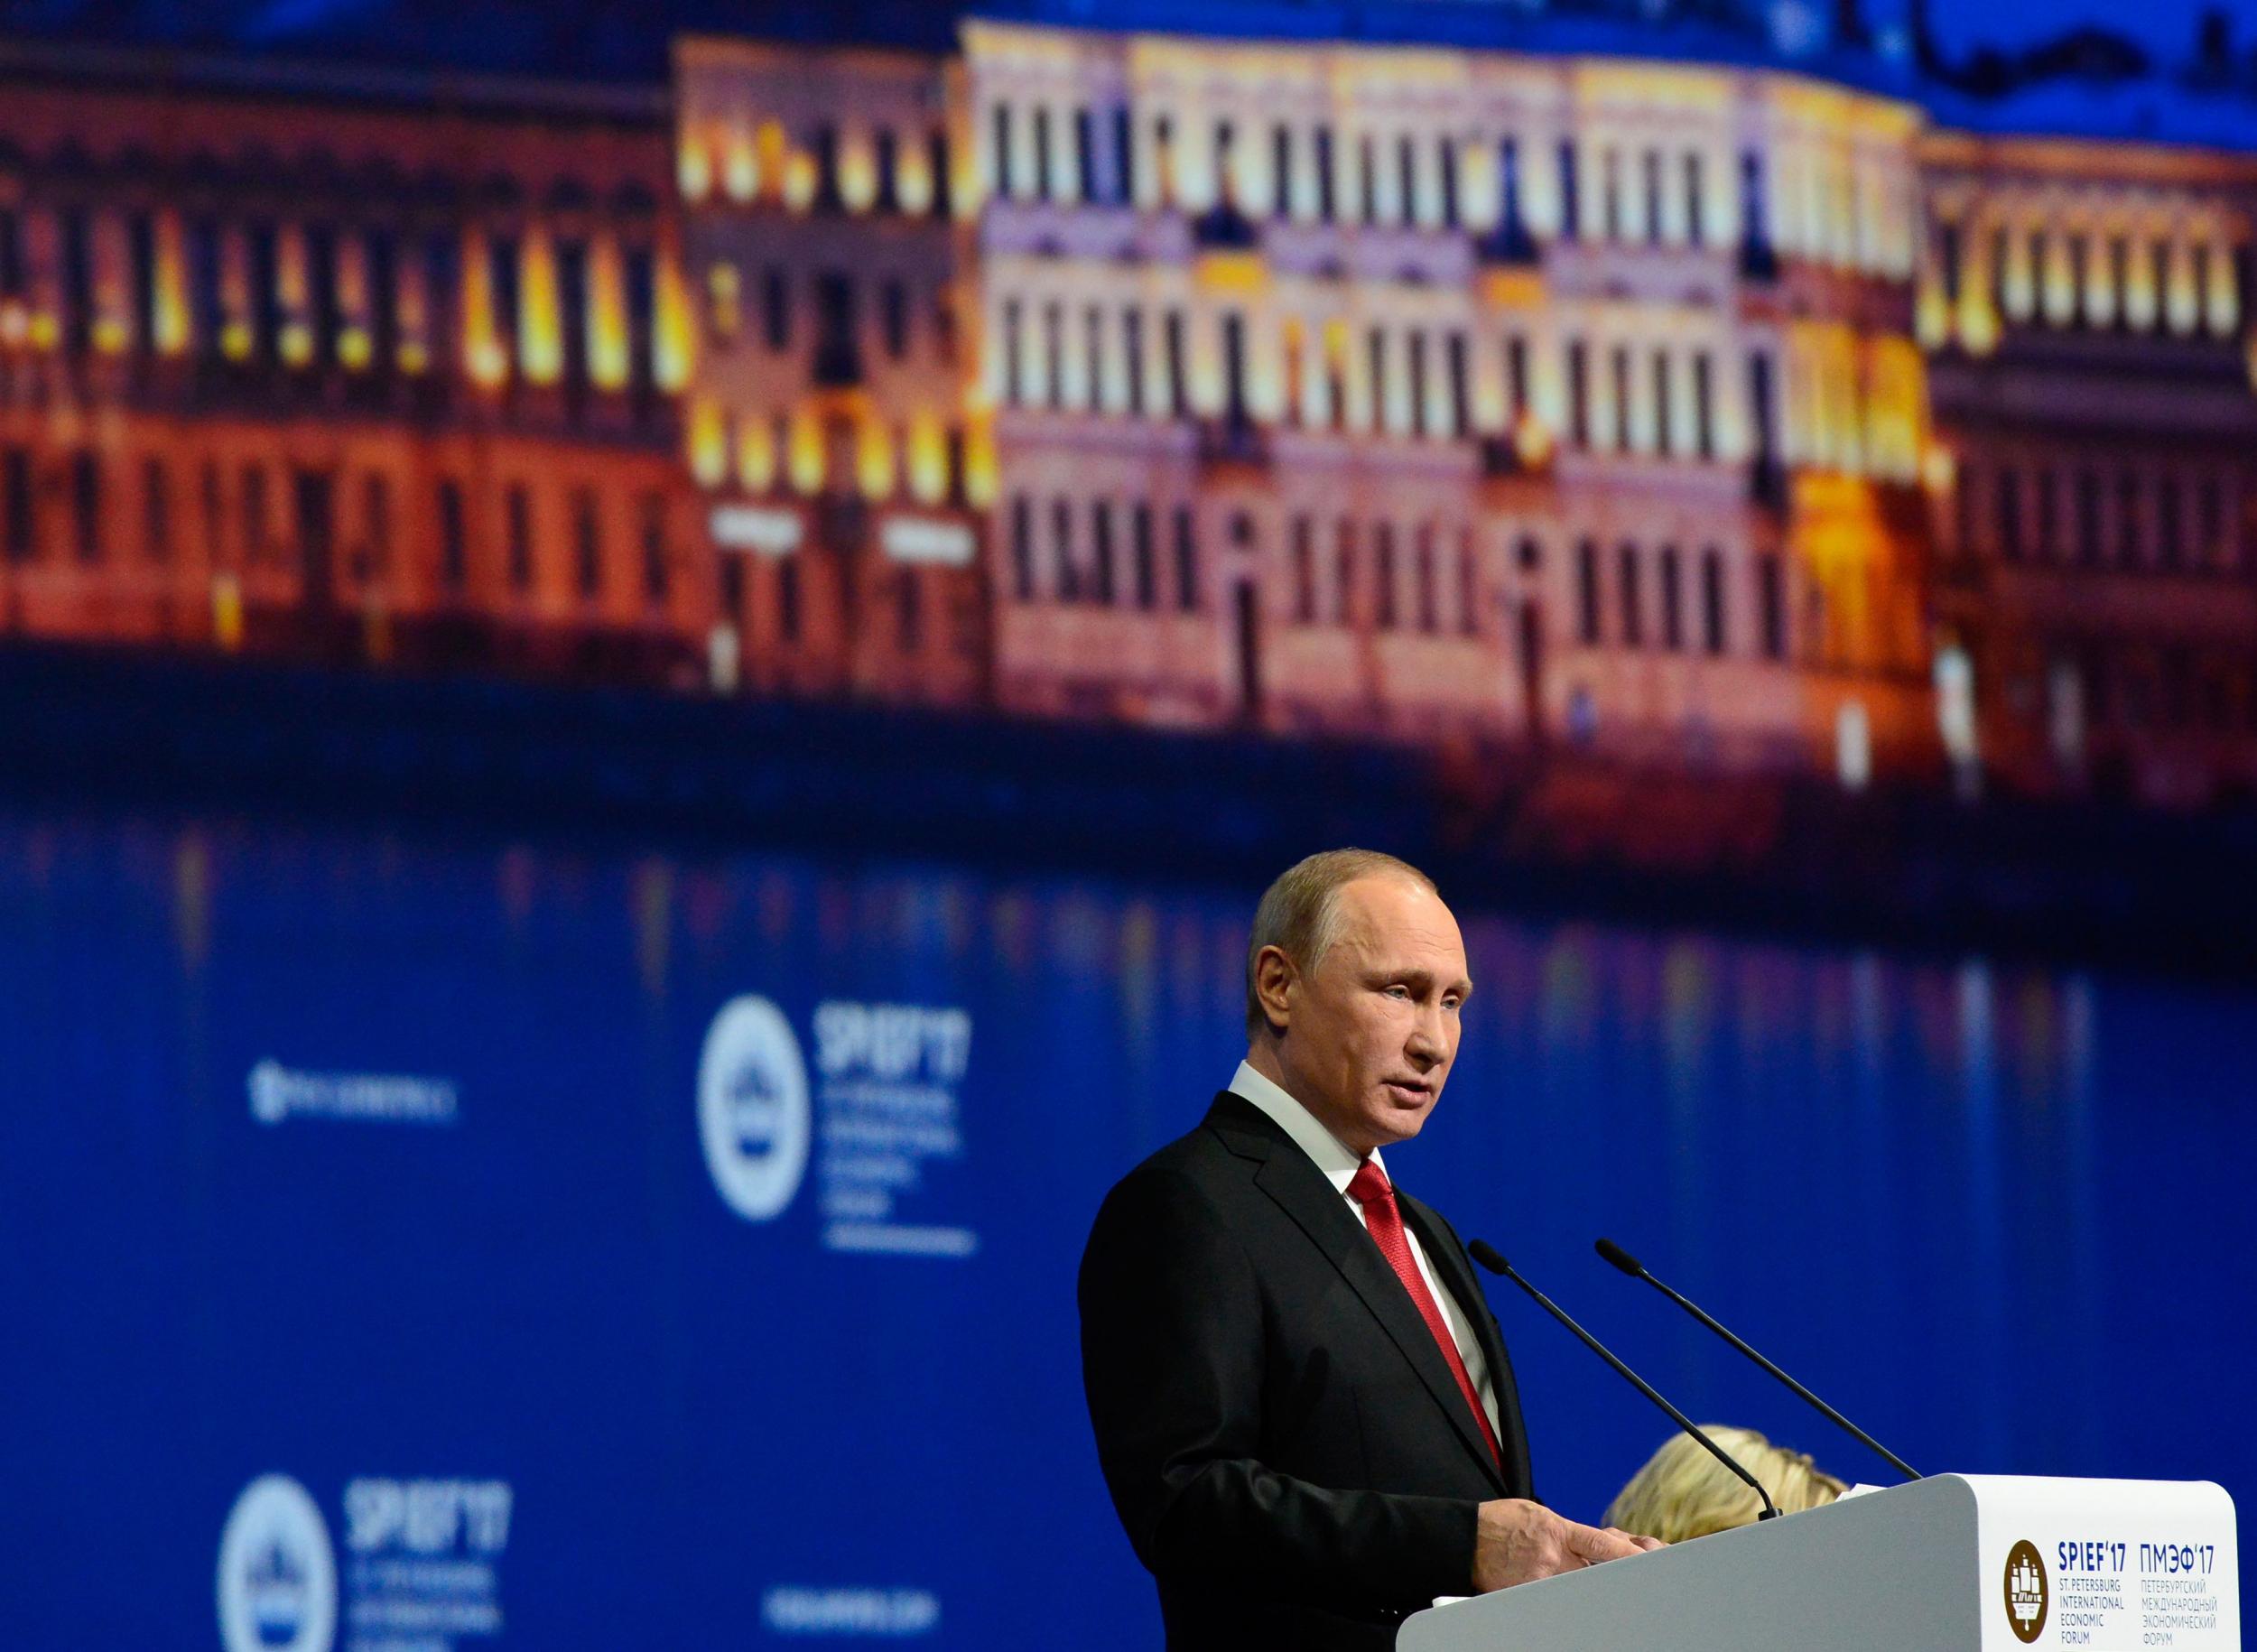 Putin said that he wasn't going to judge Trump's decision to withdraw from the Paris climate agreement